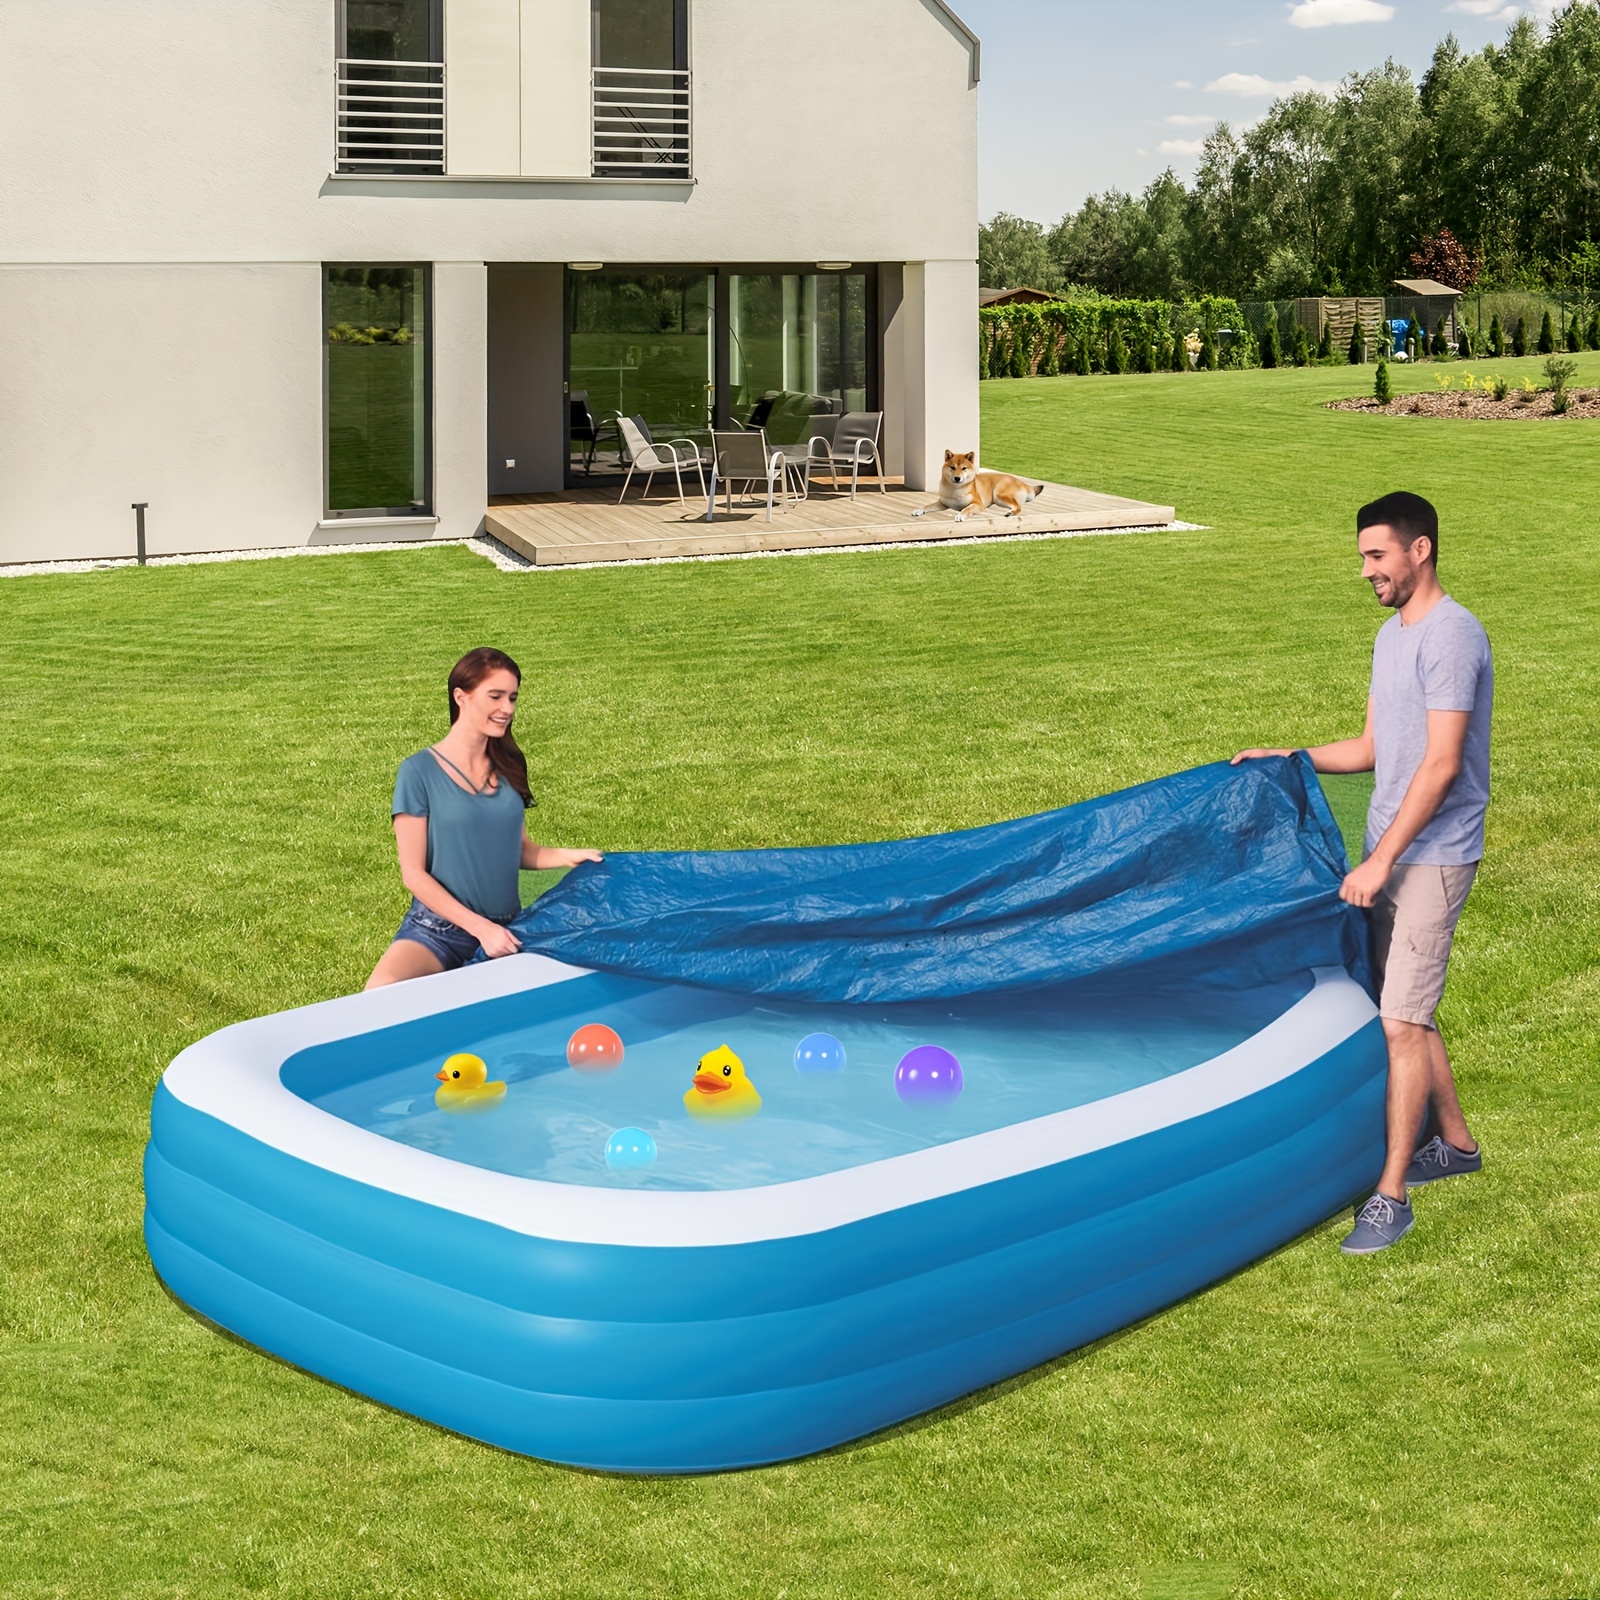 

winter Ready" Durable Pe Square Inflatable Pool Cover With Elastic Band - Thickened, Dust-proof Swimming Pool Protector For Above Ground Pools